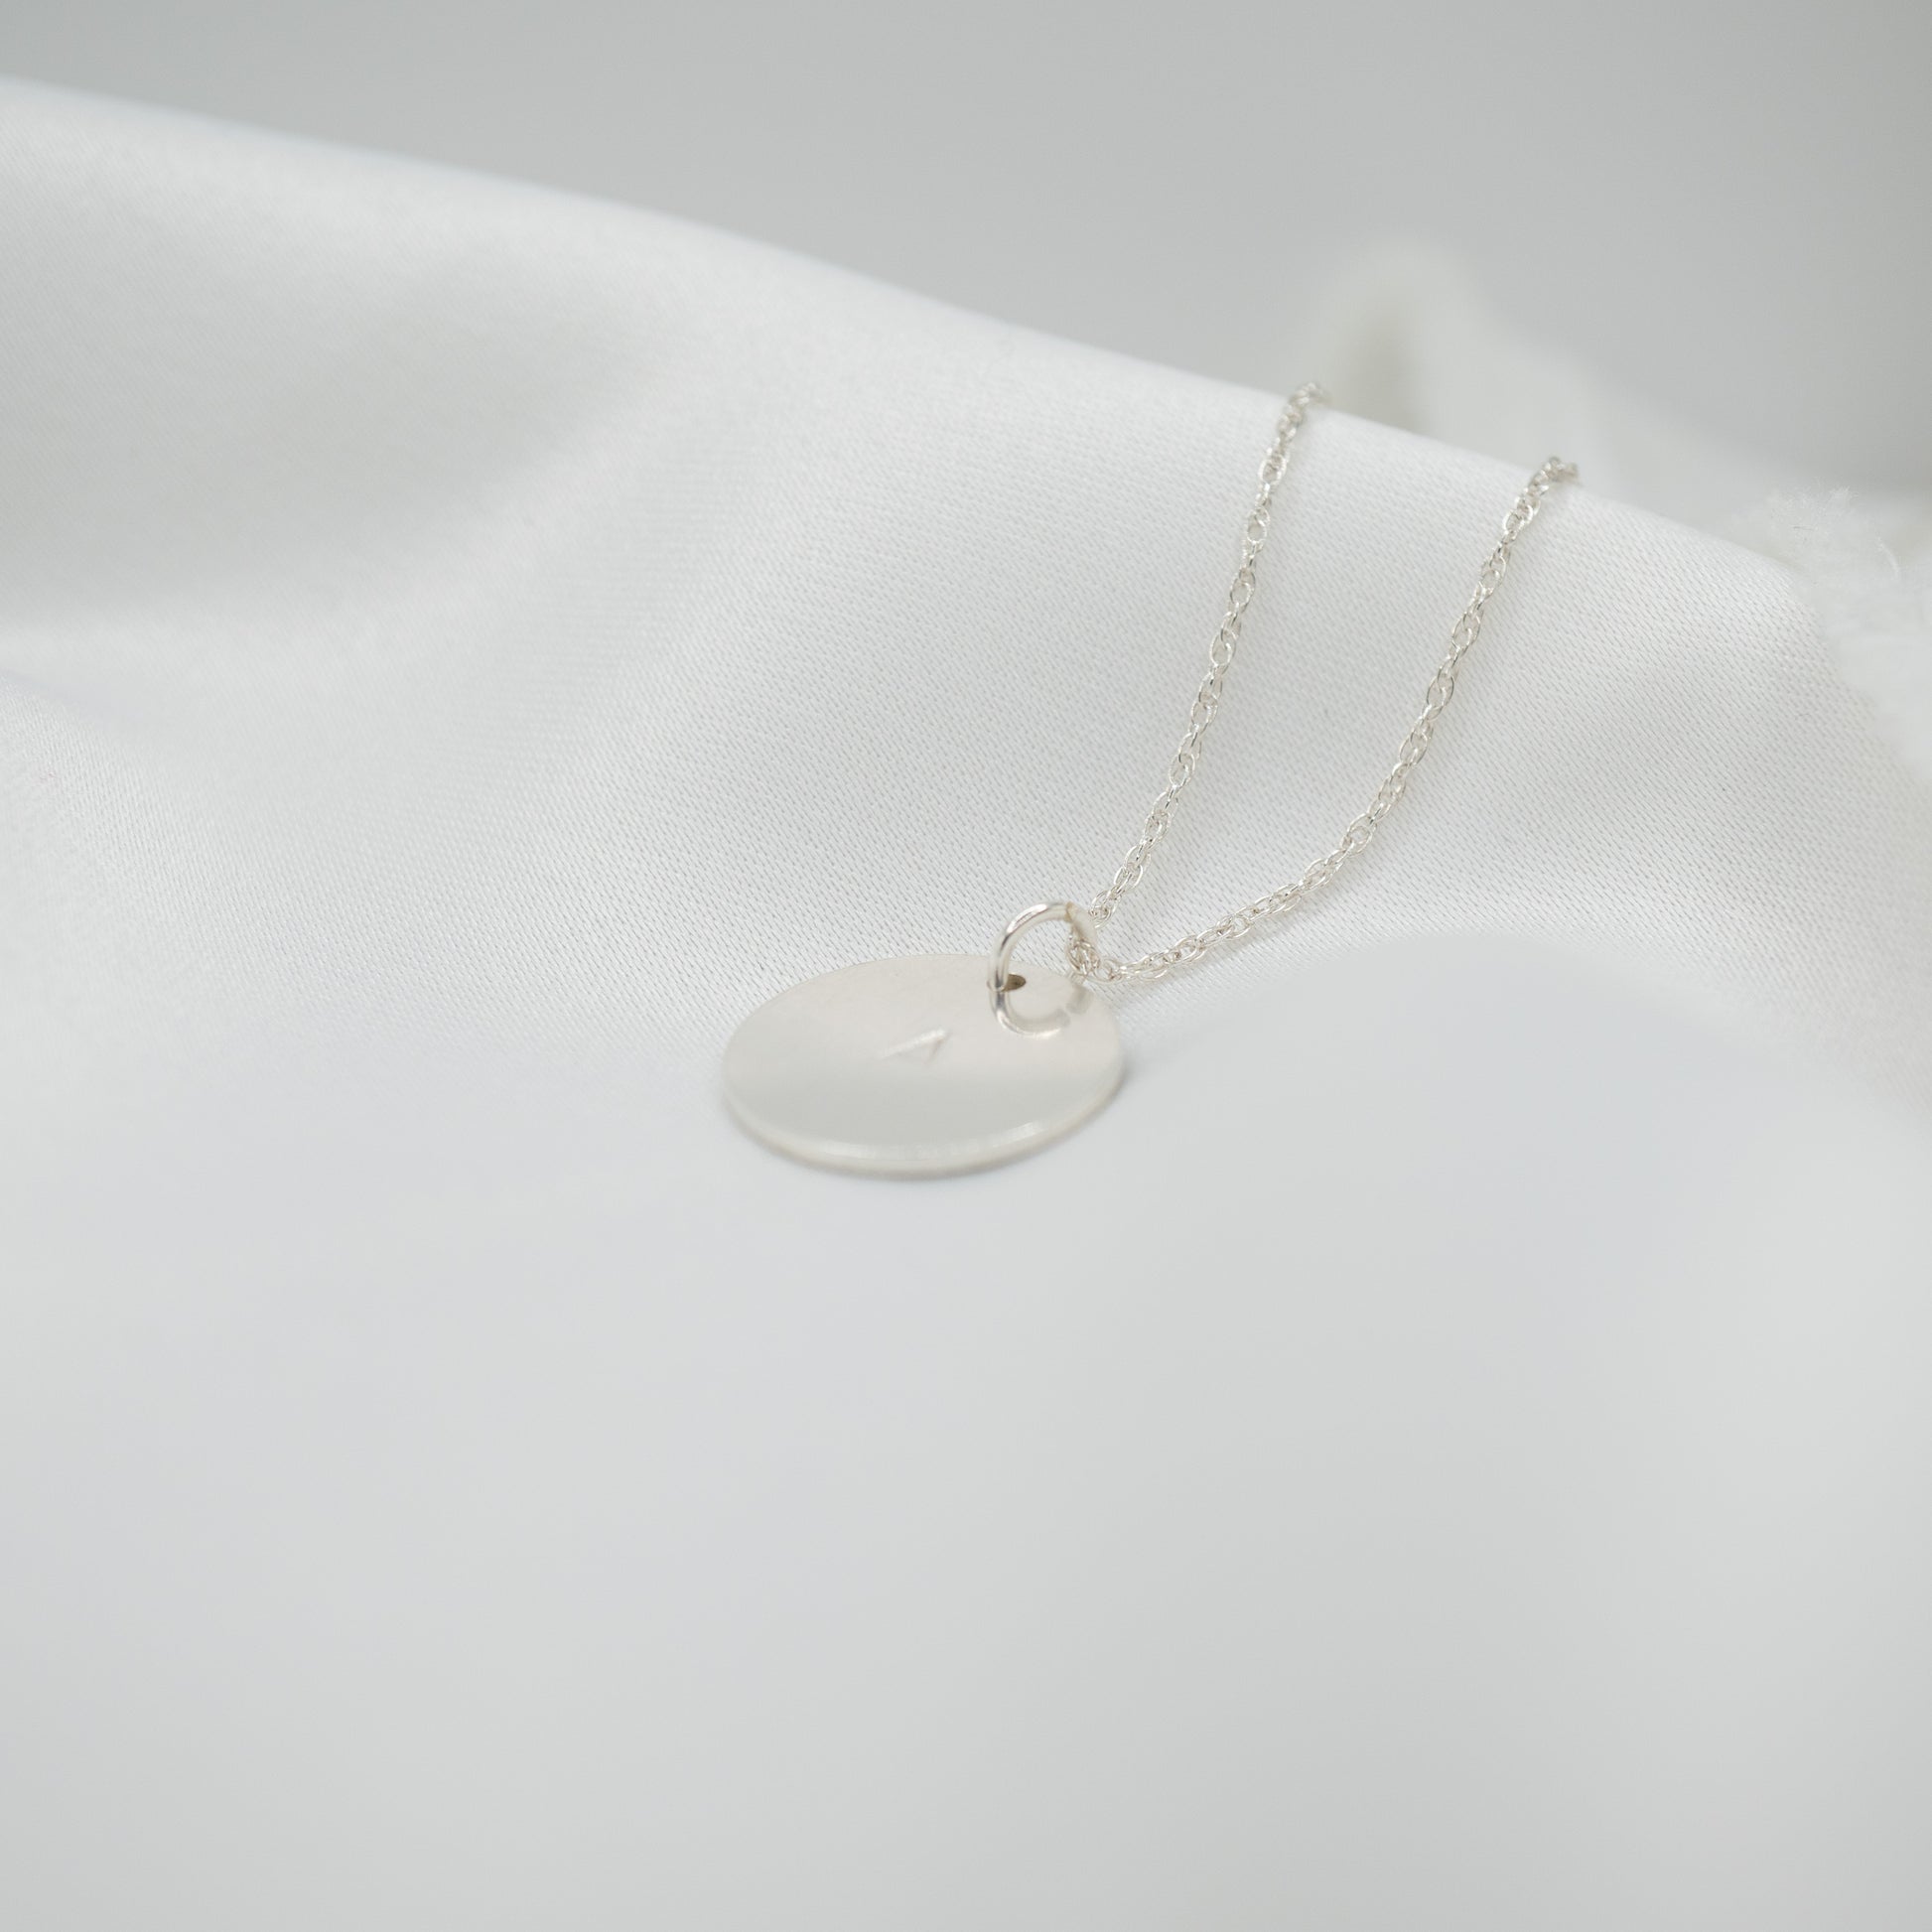 Sterling Silver Hand Stamped Round Pendant and Necklace - shot on white - side left